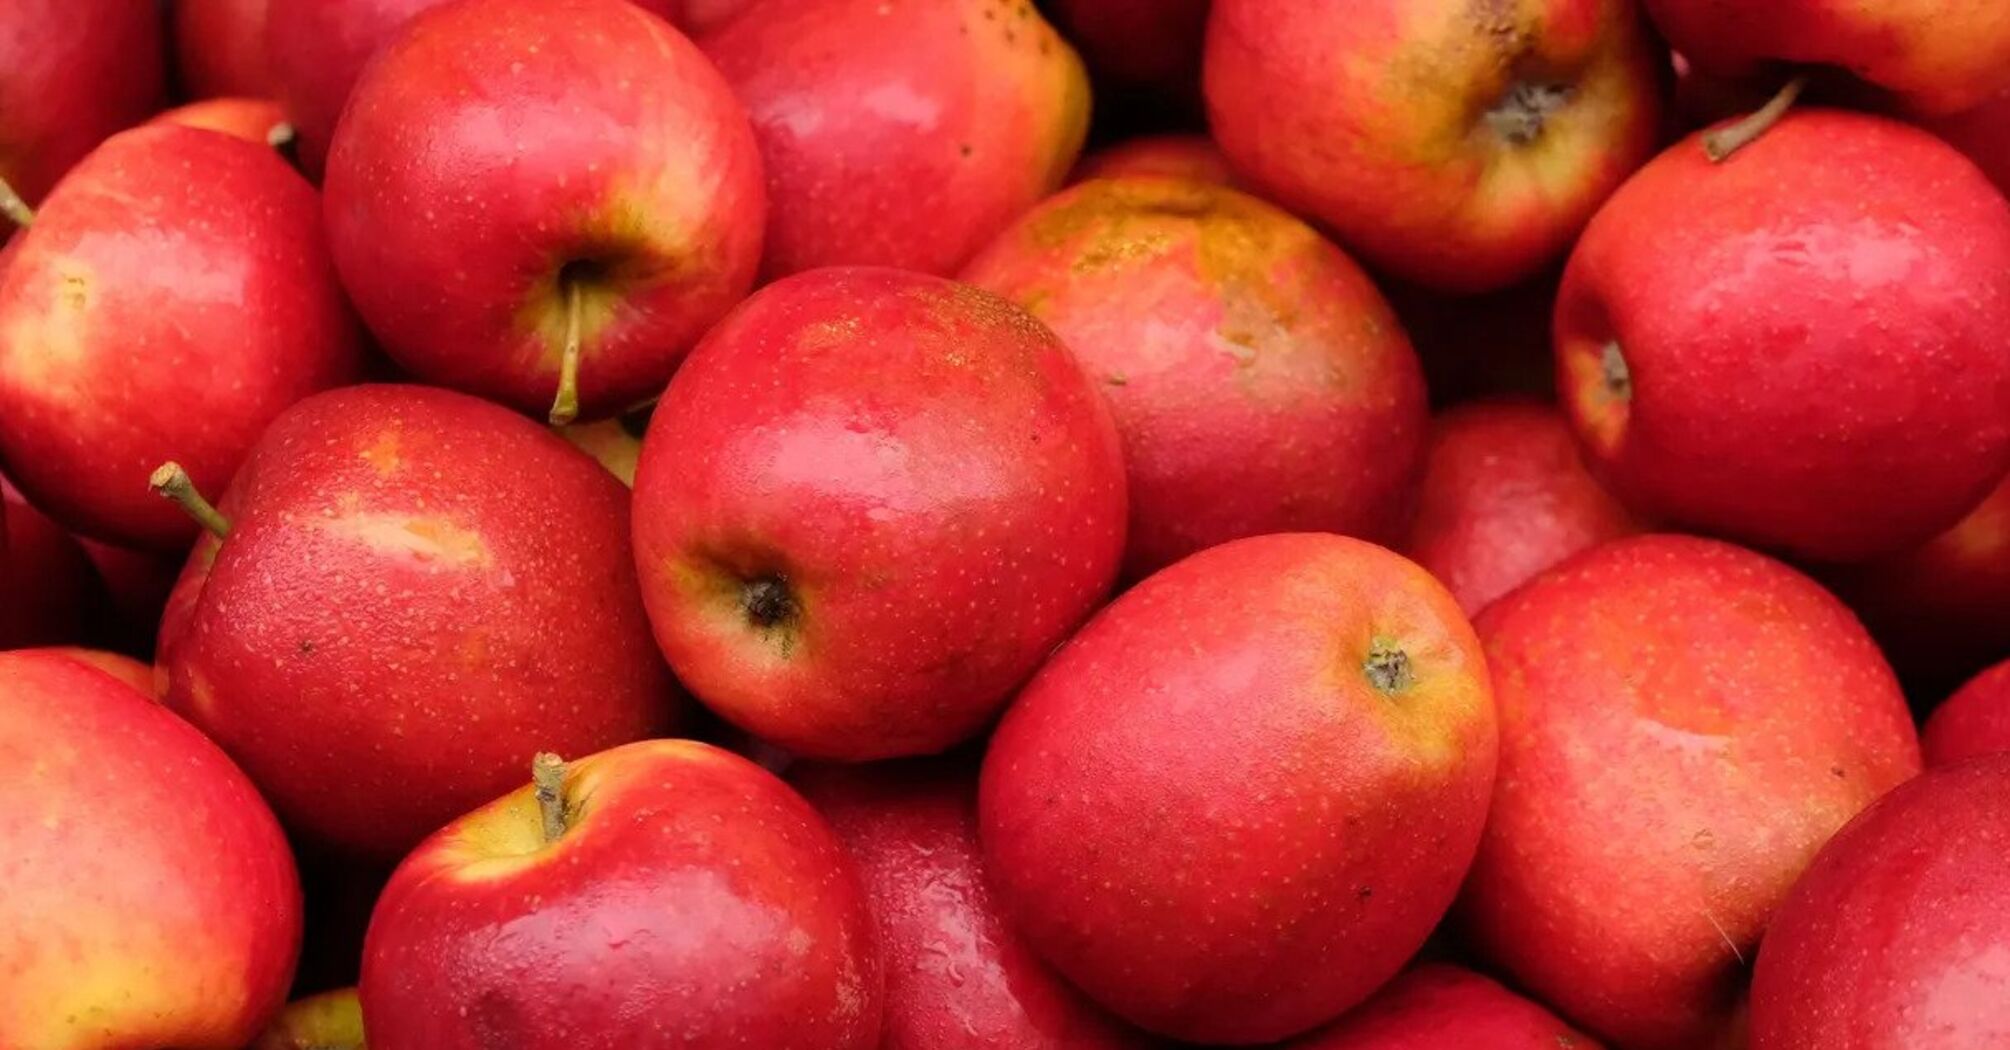 How to choose the sweetest and juiciest apples